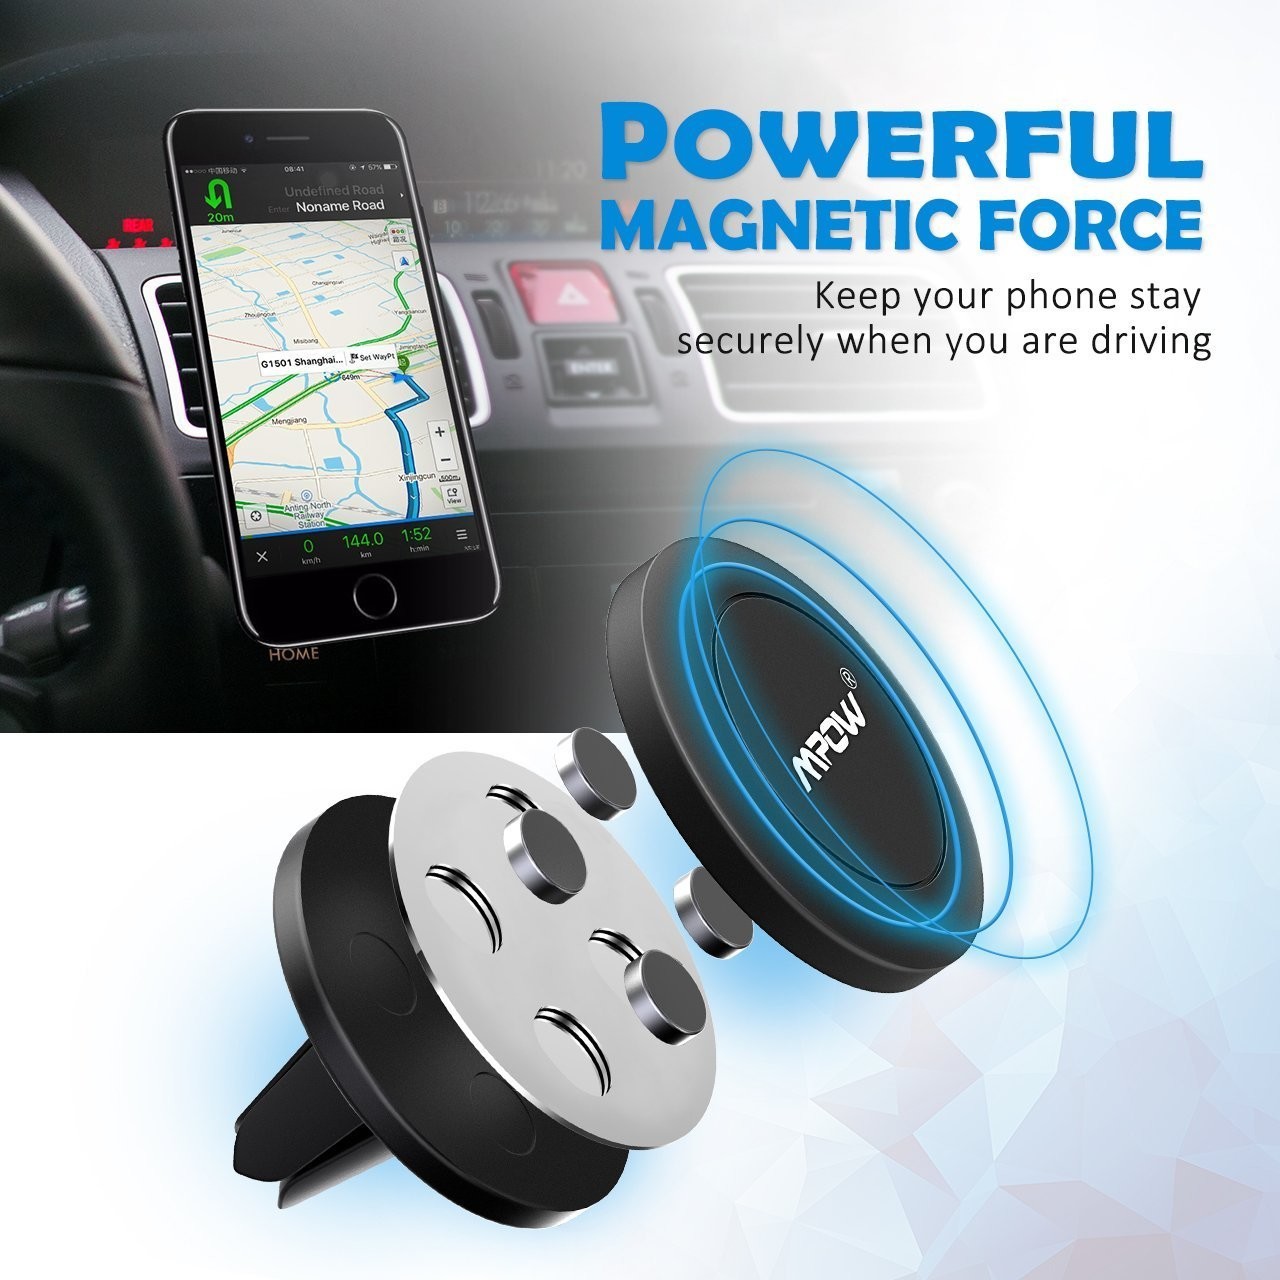 Mpow Strong Magnet Phone Mount Holder 強力マグネット車載ホルダー Iphone Android Mini Tablet